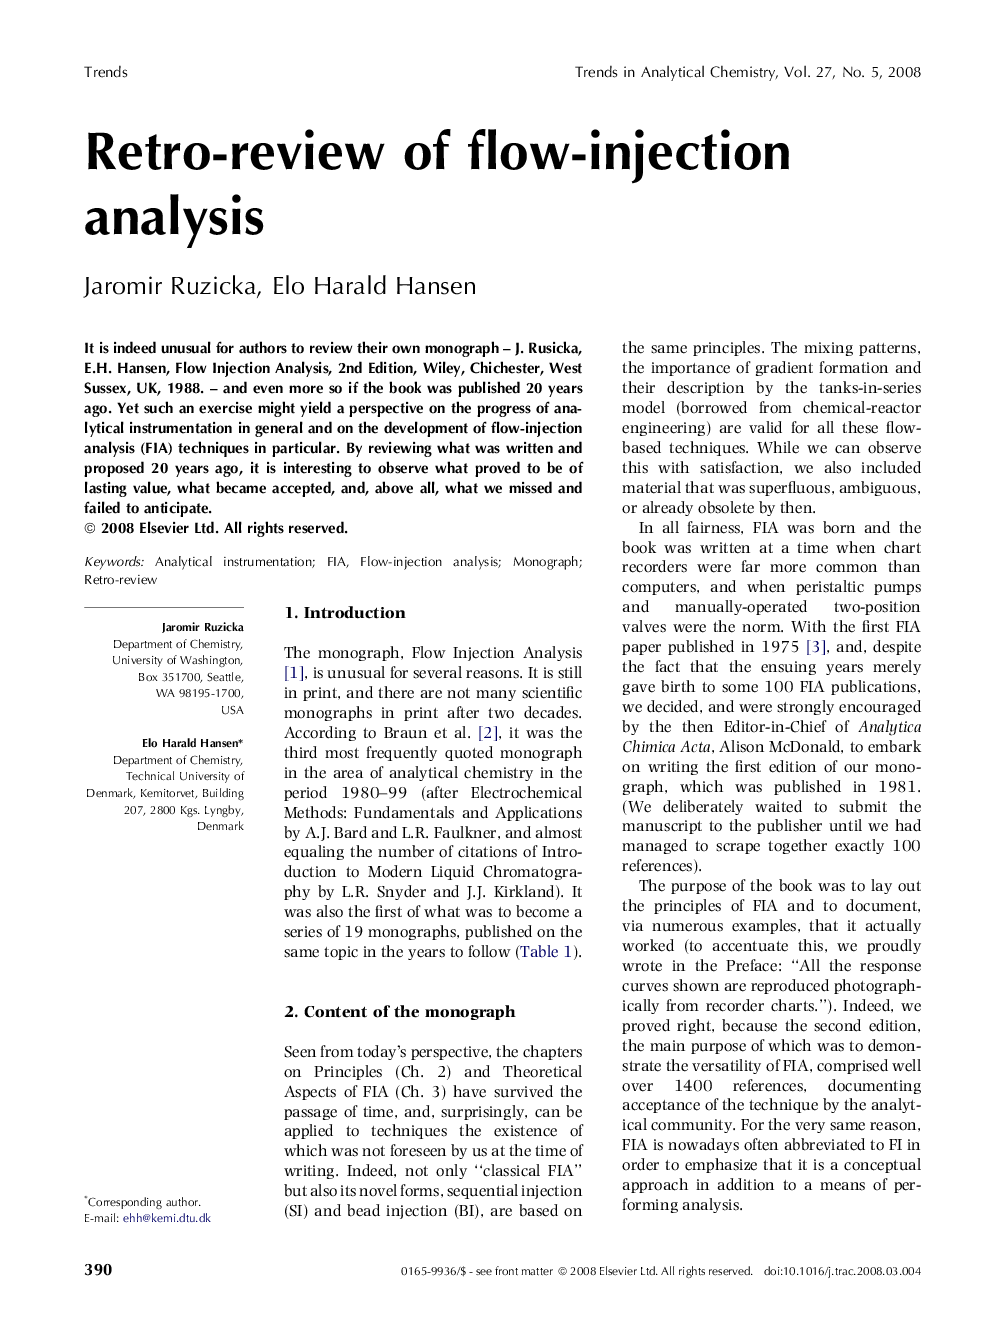 Retro-review of flow-injection analysis